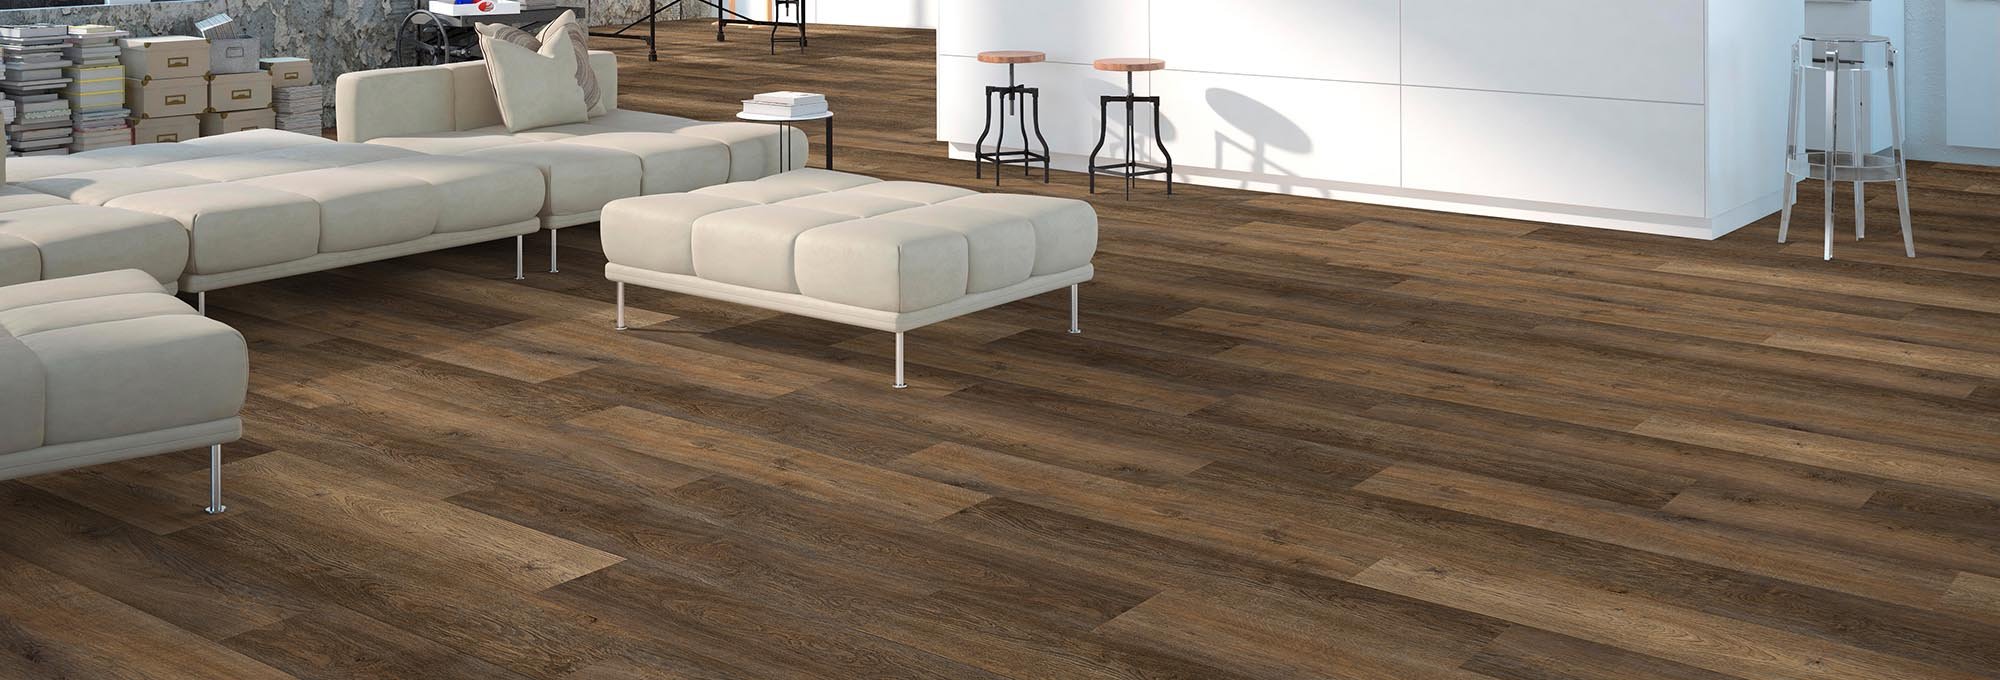 Shop Flooring Products from Circle Floor Company | Parma, OH